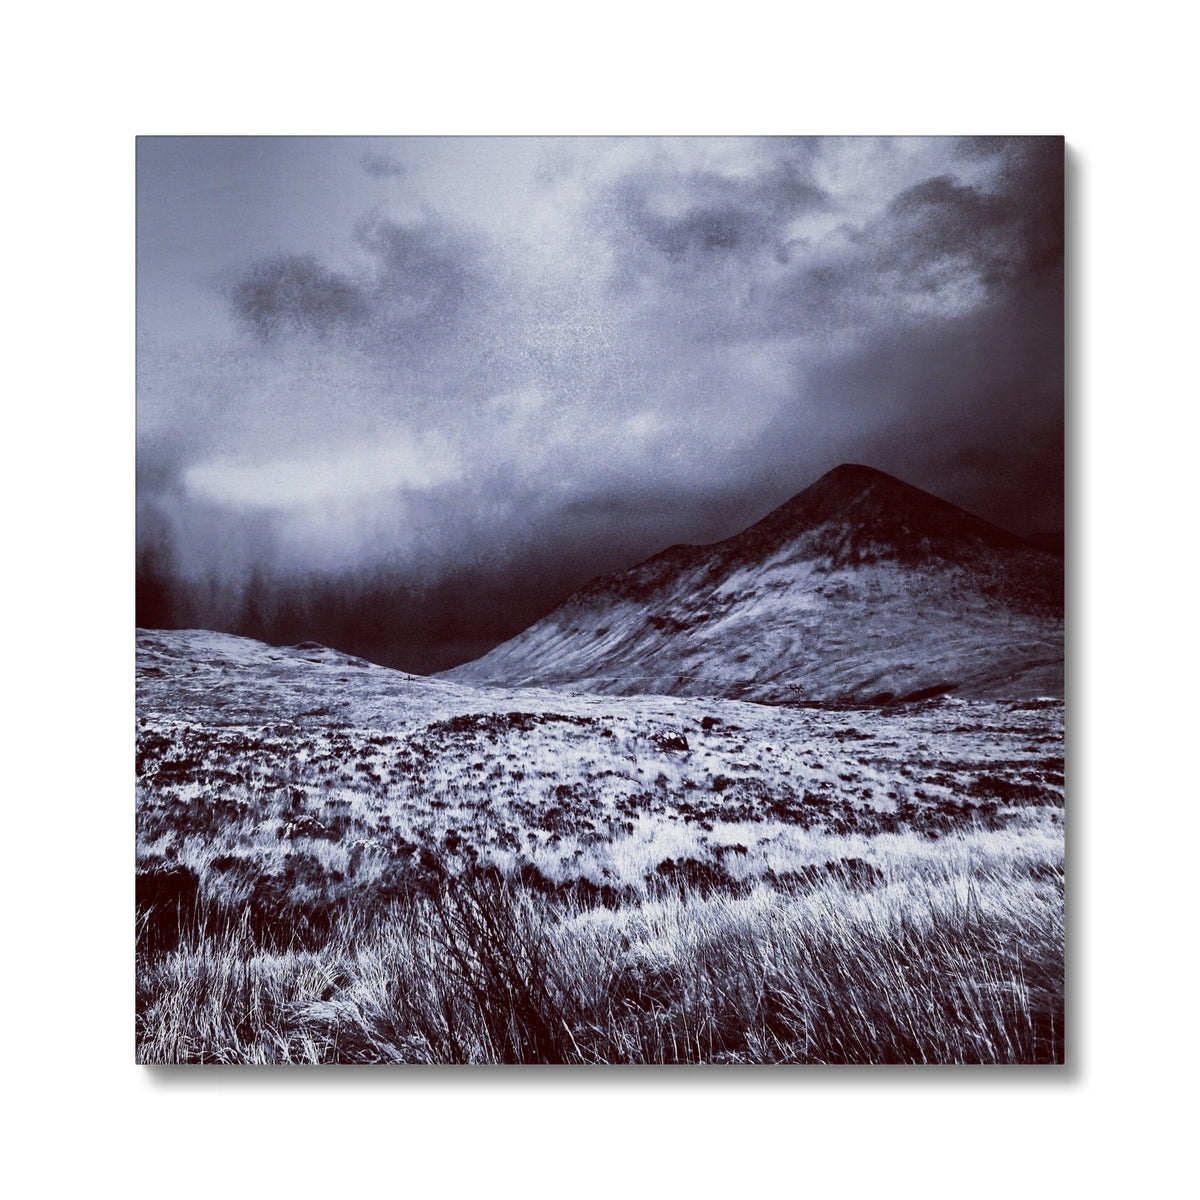 A Brooding Glen Varagil Skye Painting | Canvas From Scotland-Contemporary Stretched Canvas Prints-Skye Art Gallery-24"x24"-Paintings, Prints, Homeware, Art Gifts From Scotland By Scottish Artist Kevin Hunter